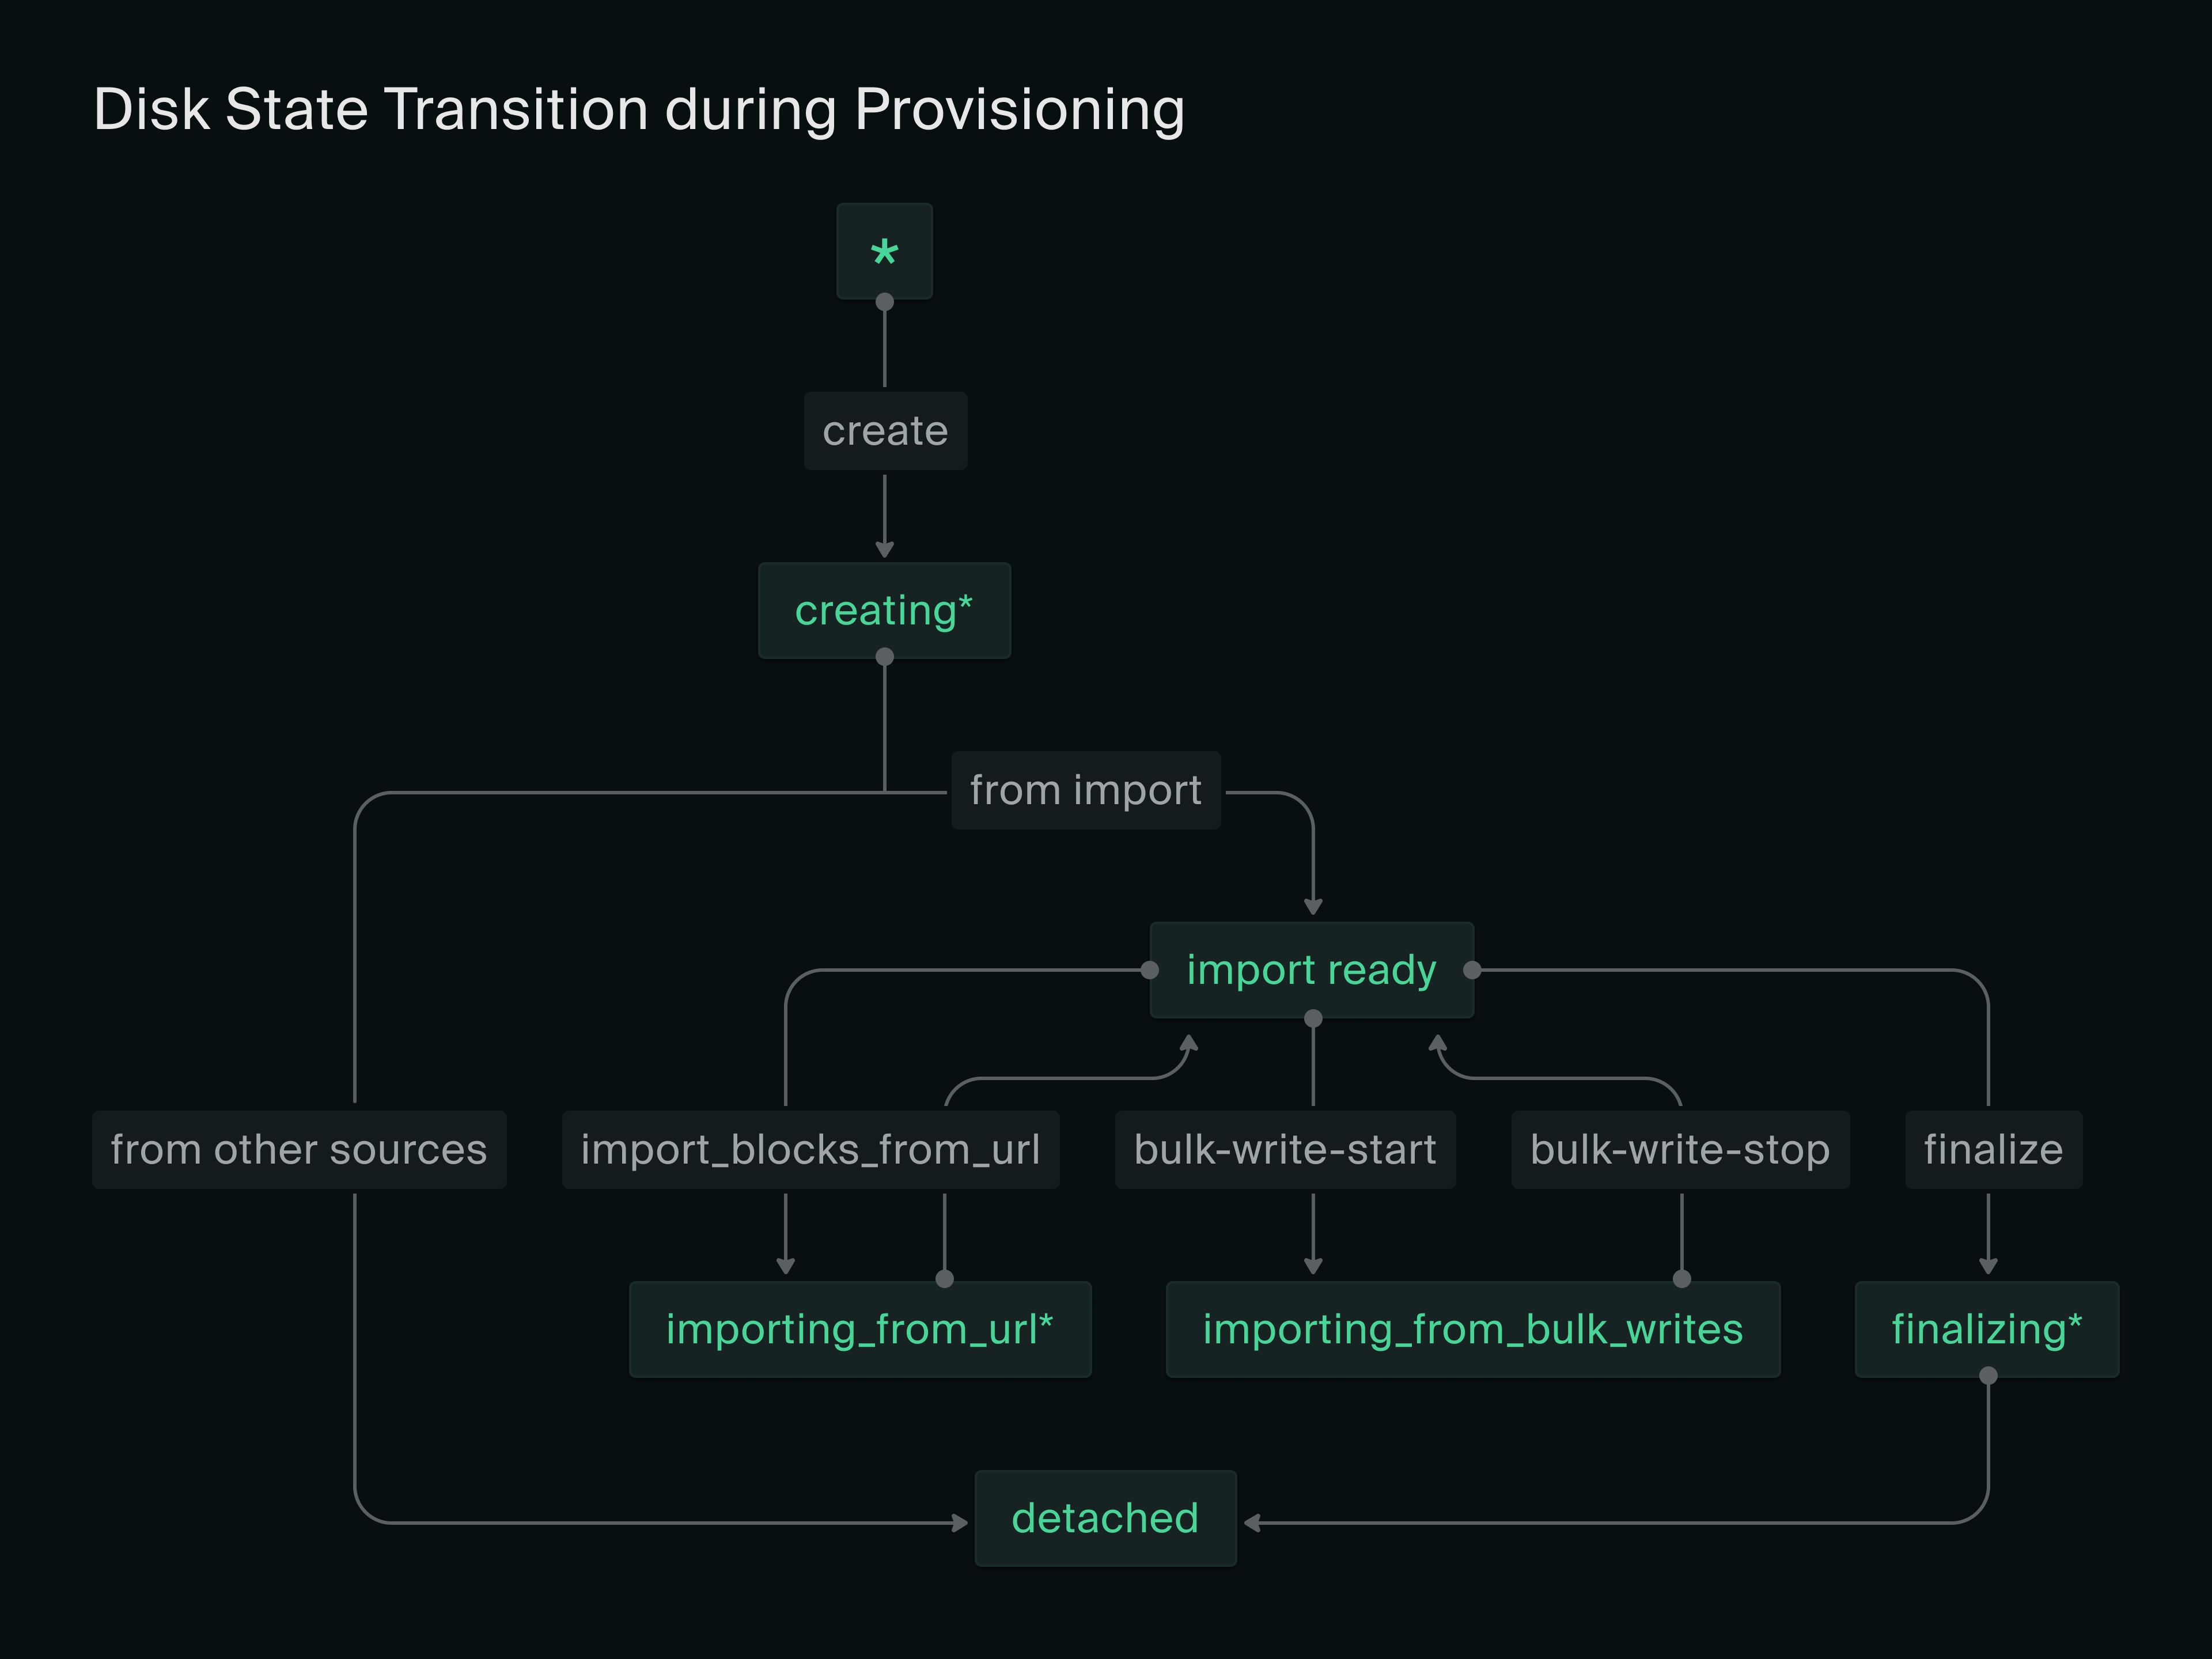 Disk Provisioning State Transition